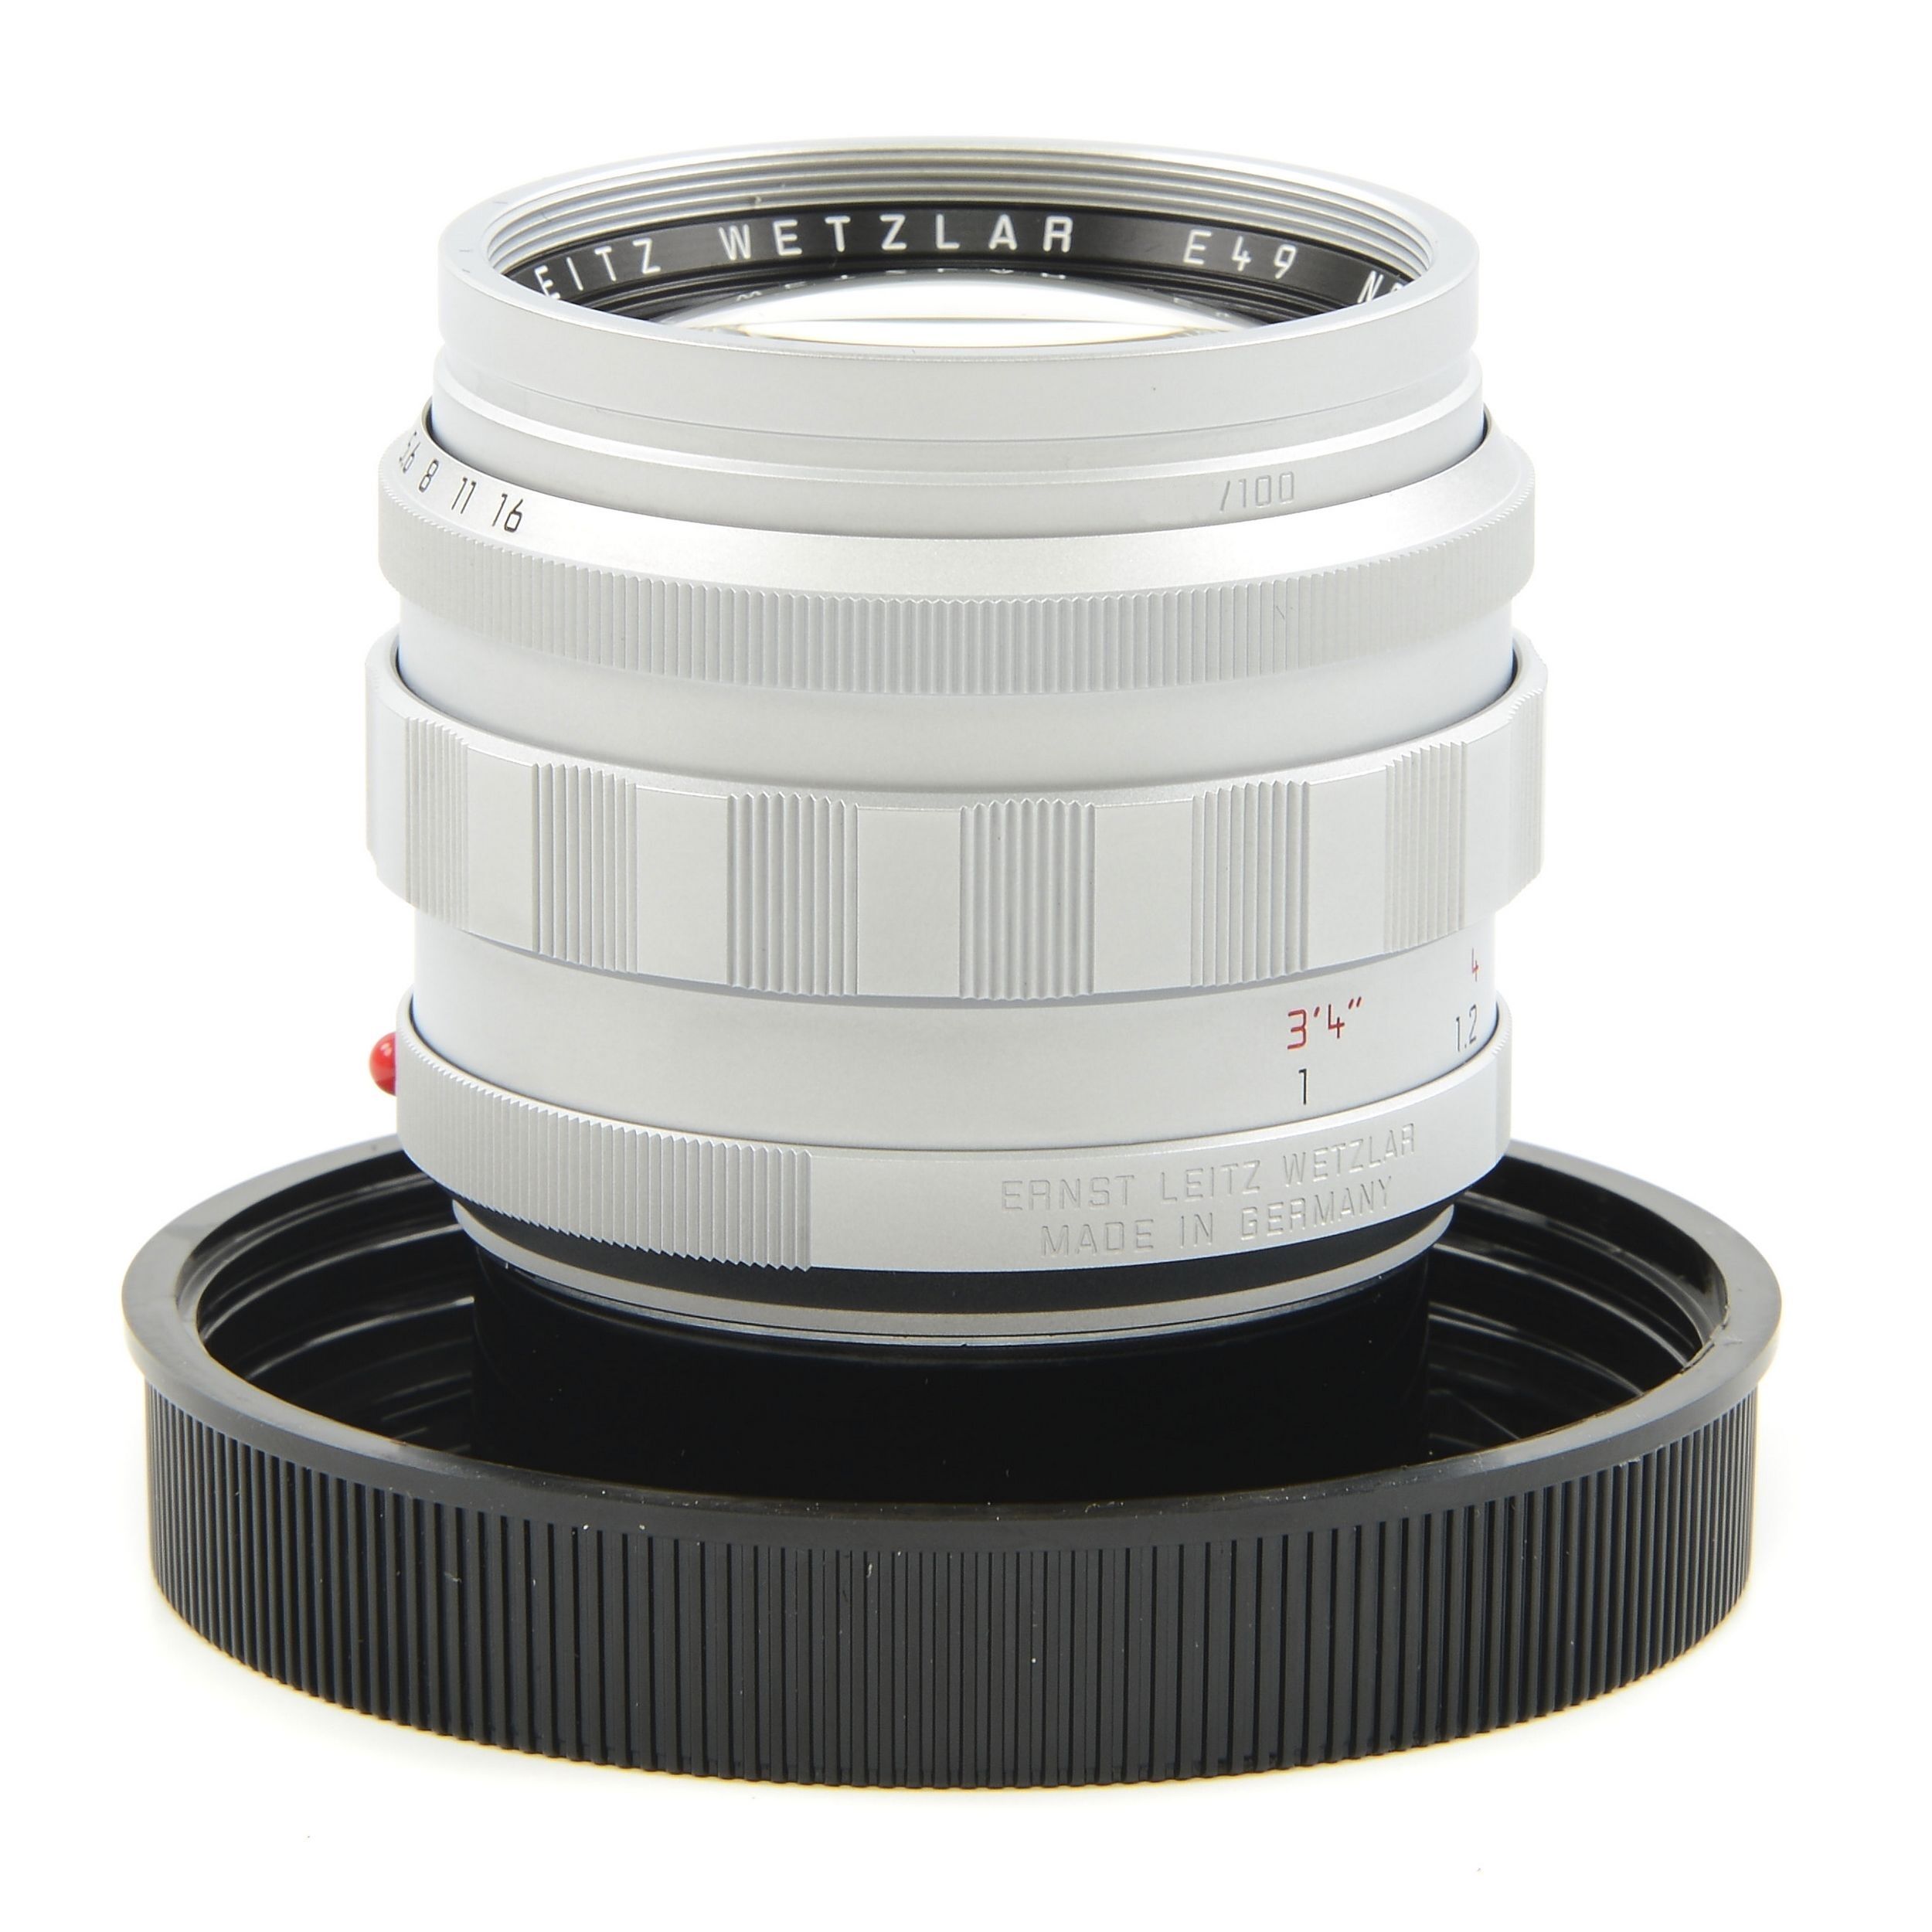 LEICA MP HISTORICA 1975-2020 SET 50MM F1.2 NOCTILUX SILVER MATCHING NUMBER #3422